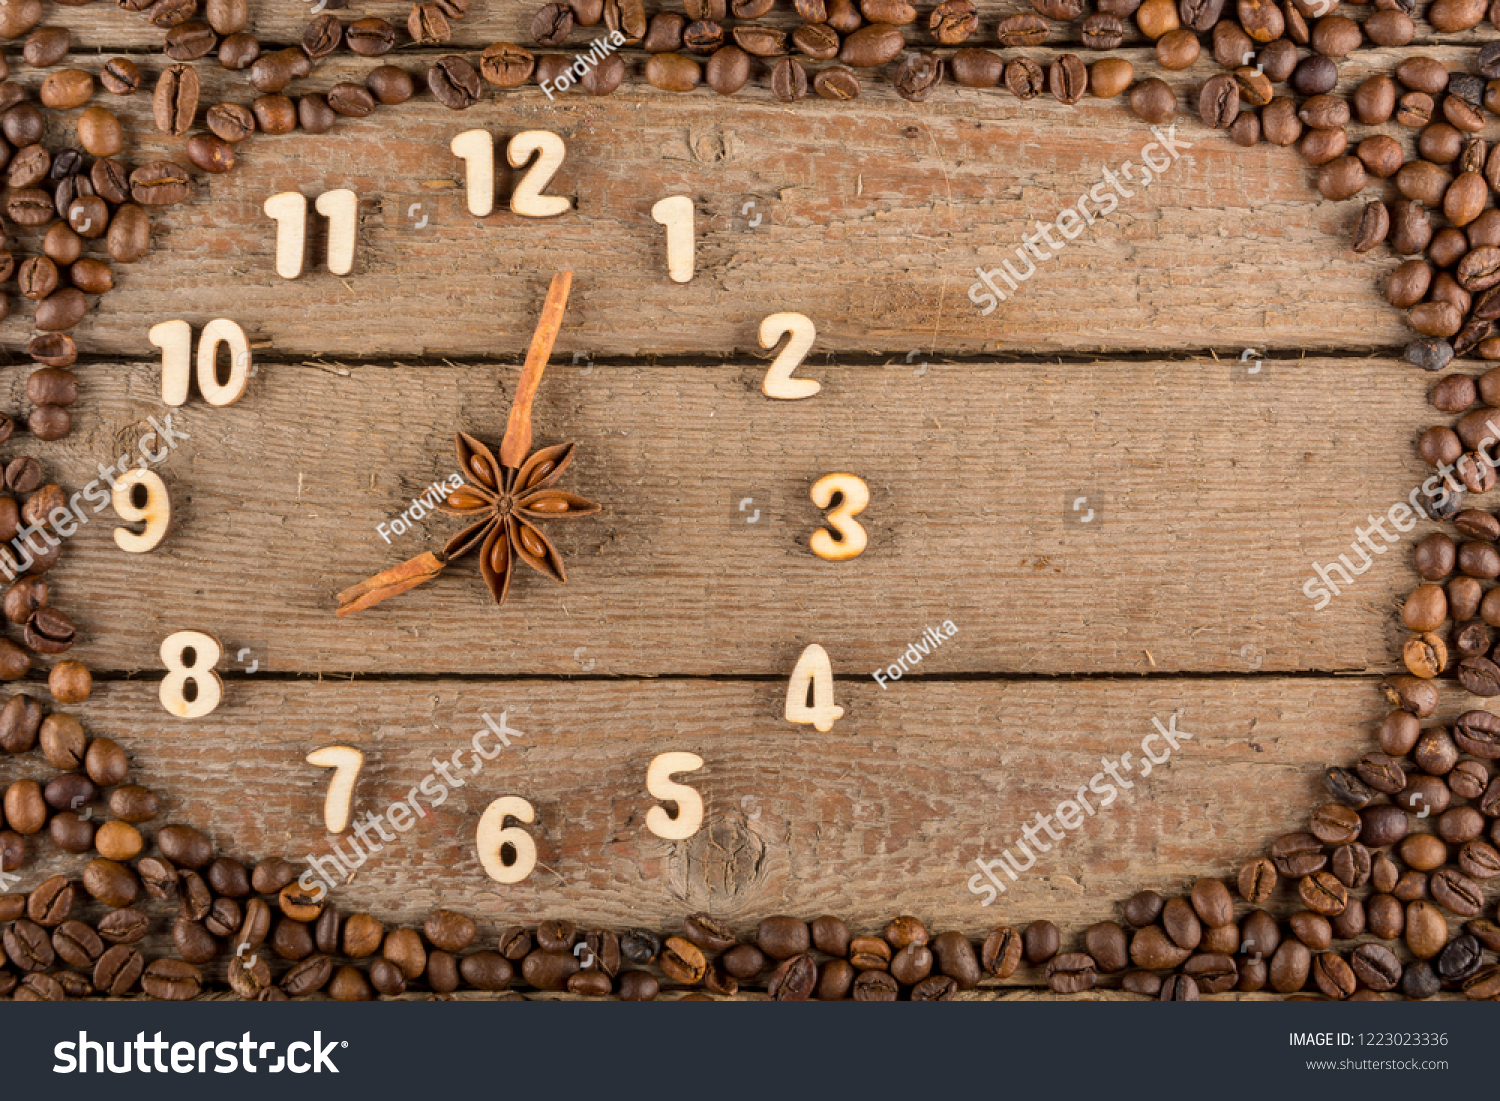 Decorative clock with wooden numerals and arrows made of cinnamon sticks, showing 8 o'clock, on a wooden background and a frame of coffee beans. Kitchen, advertising, banner, Copy space,  Flat Lay. #1223023336